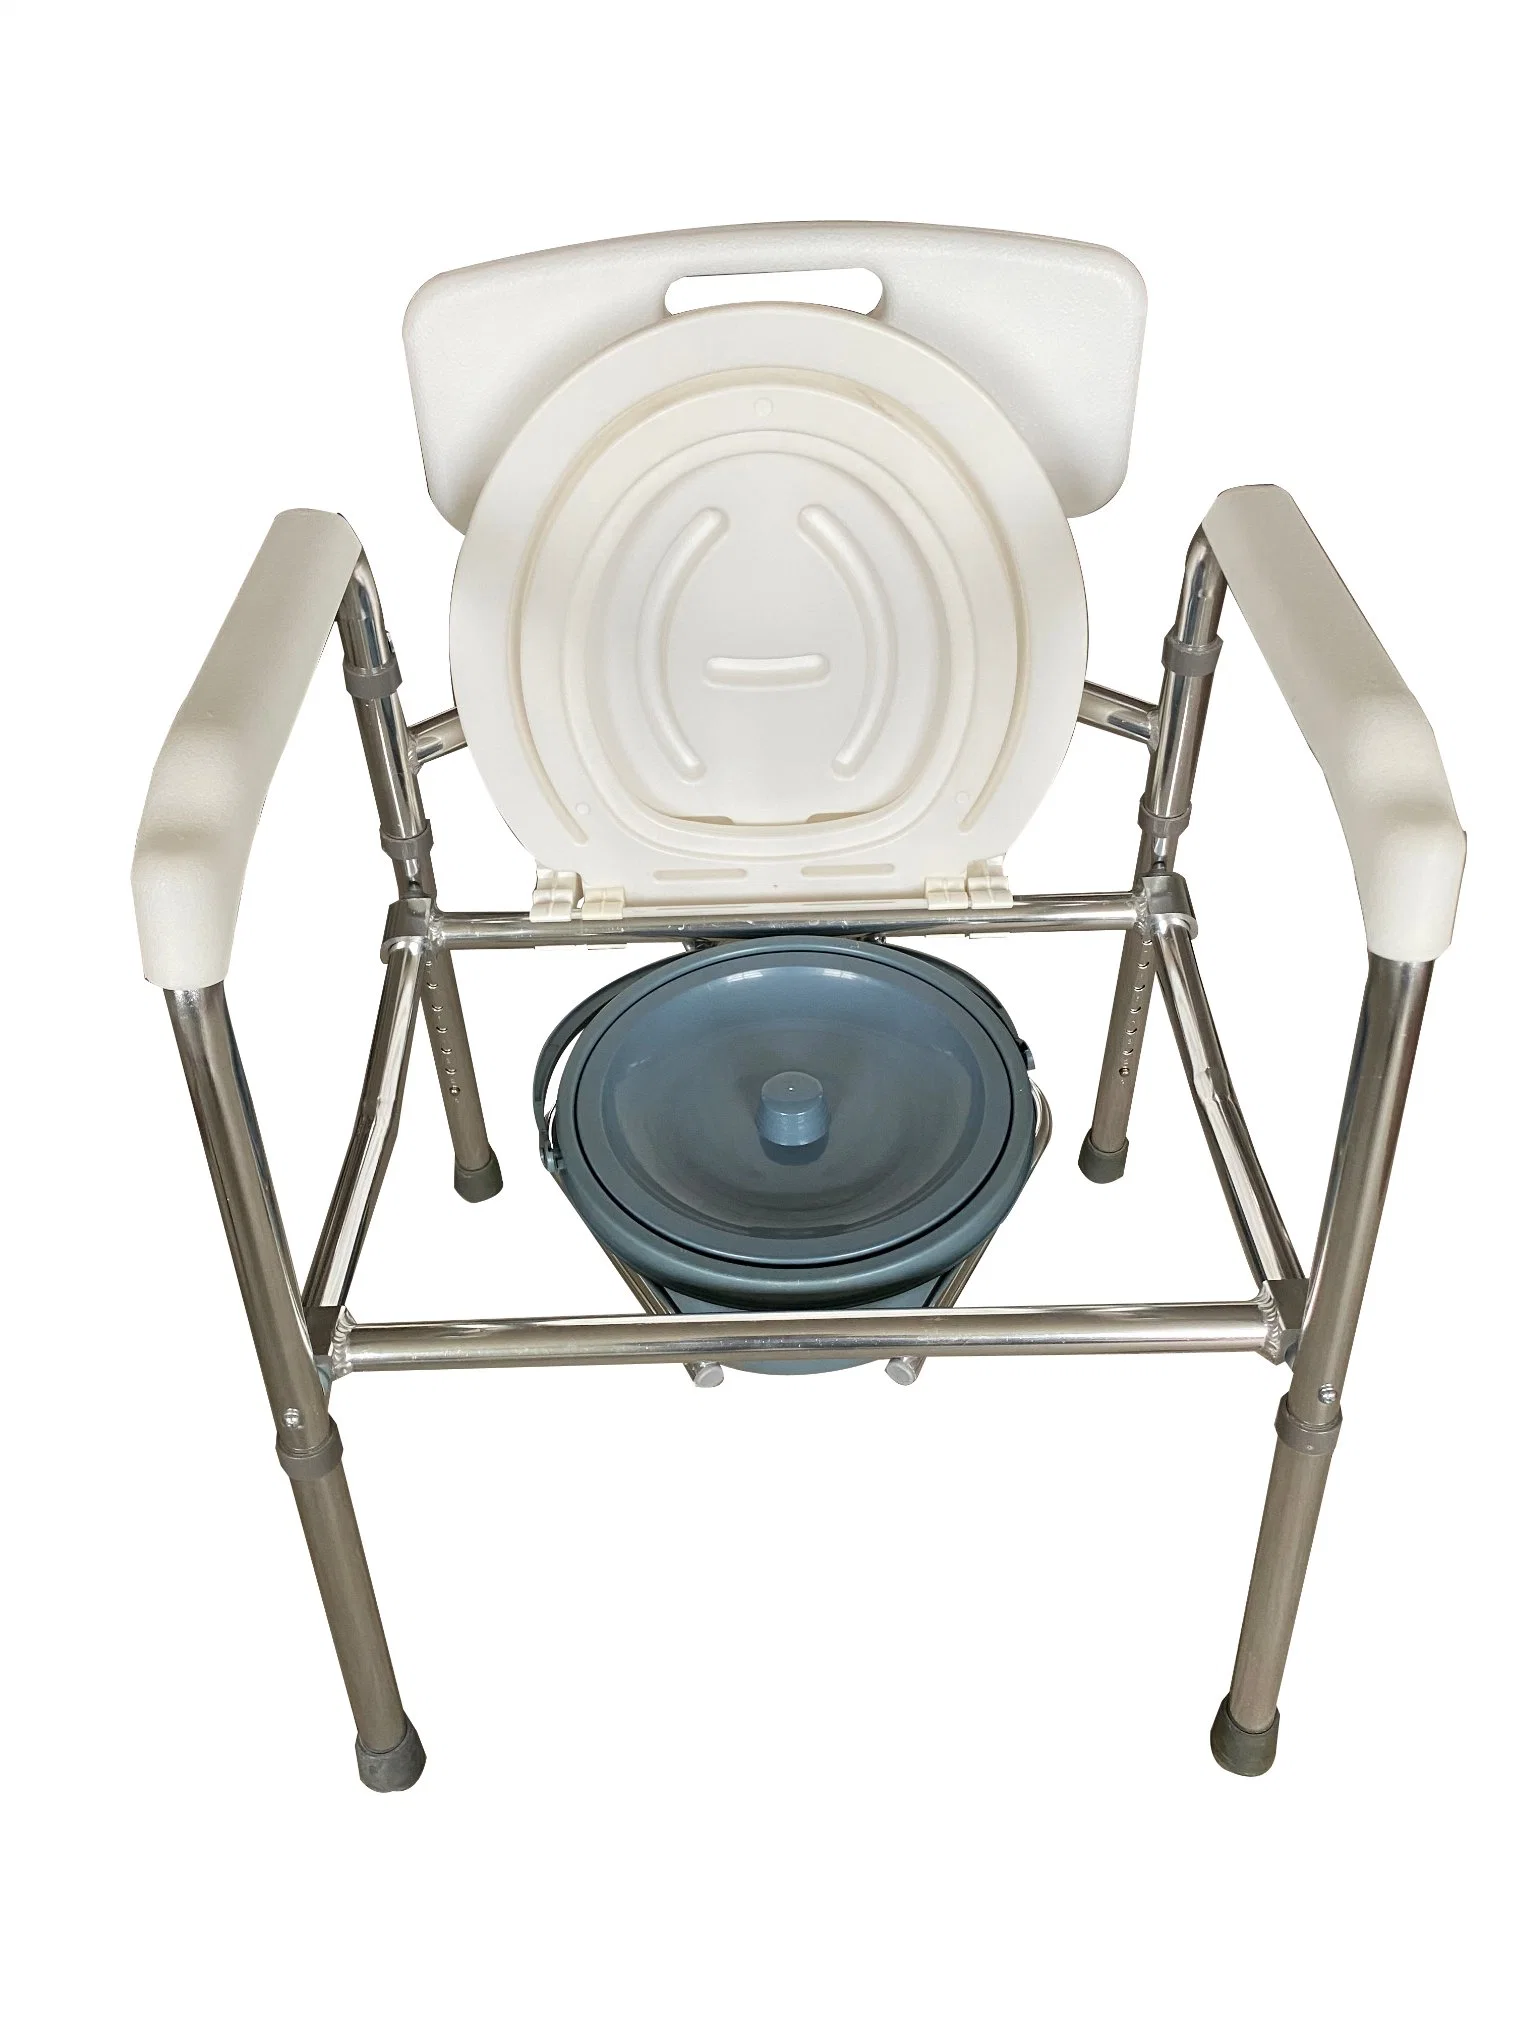 Adjustable Steel Toilet Chair Potty Chair Commode Chair with Bucket